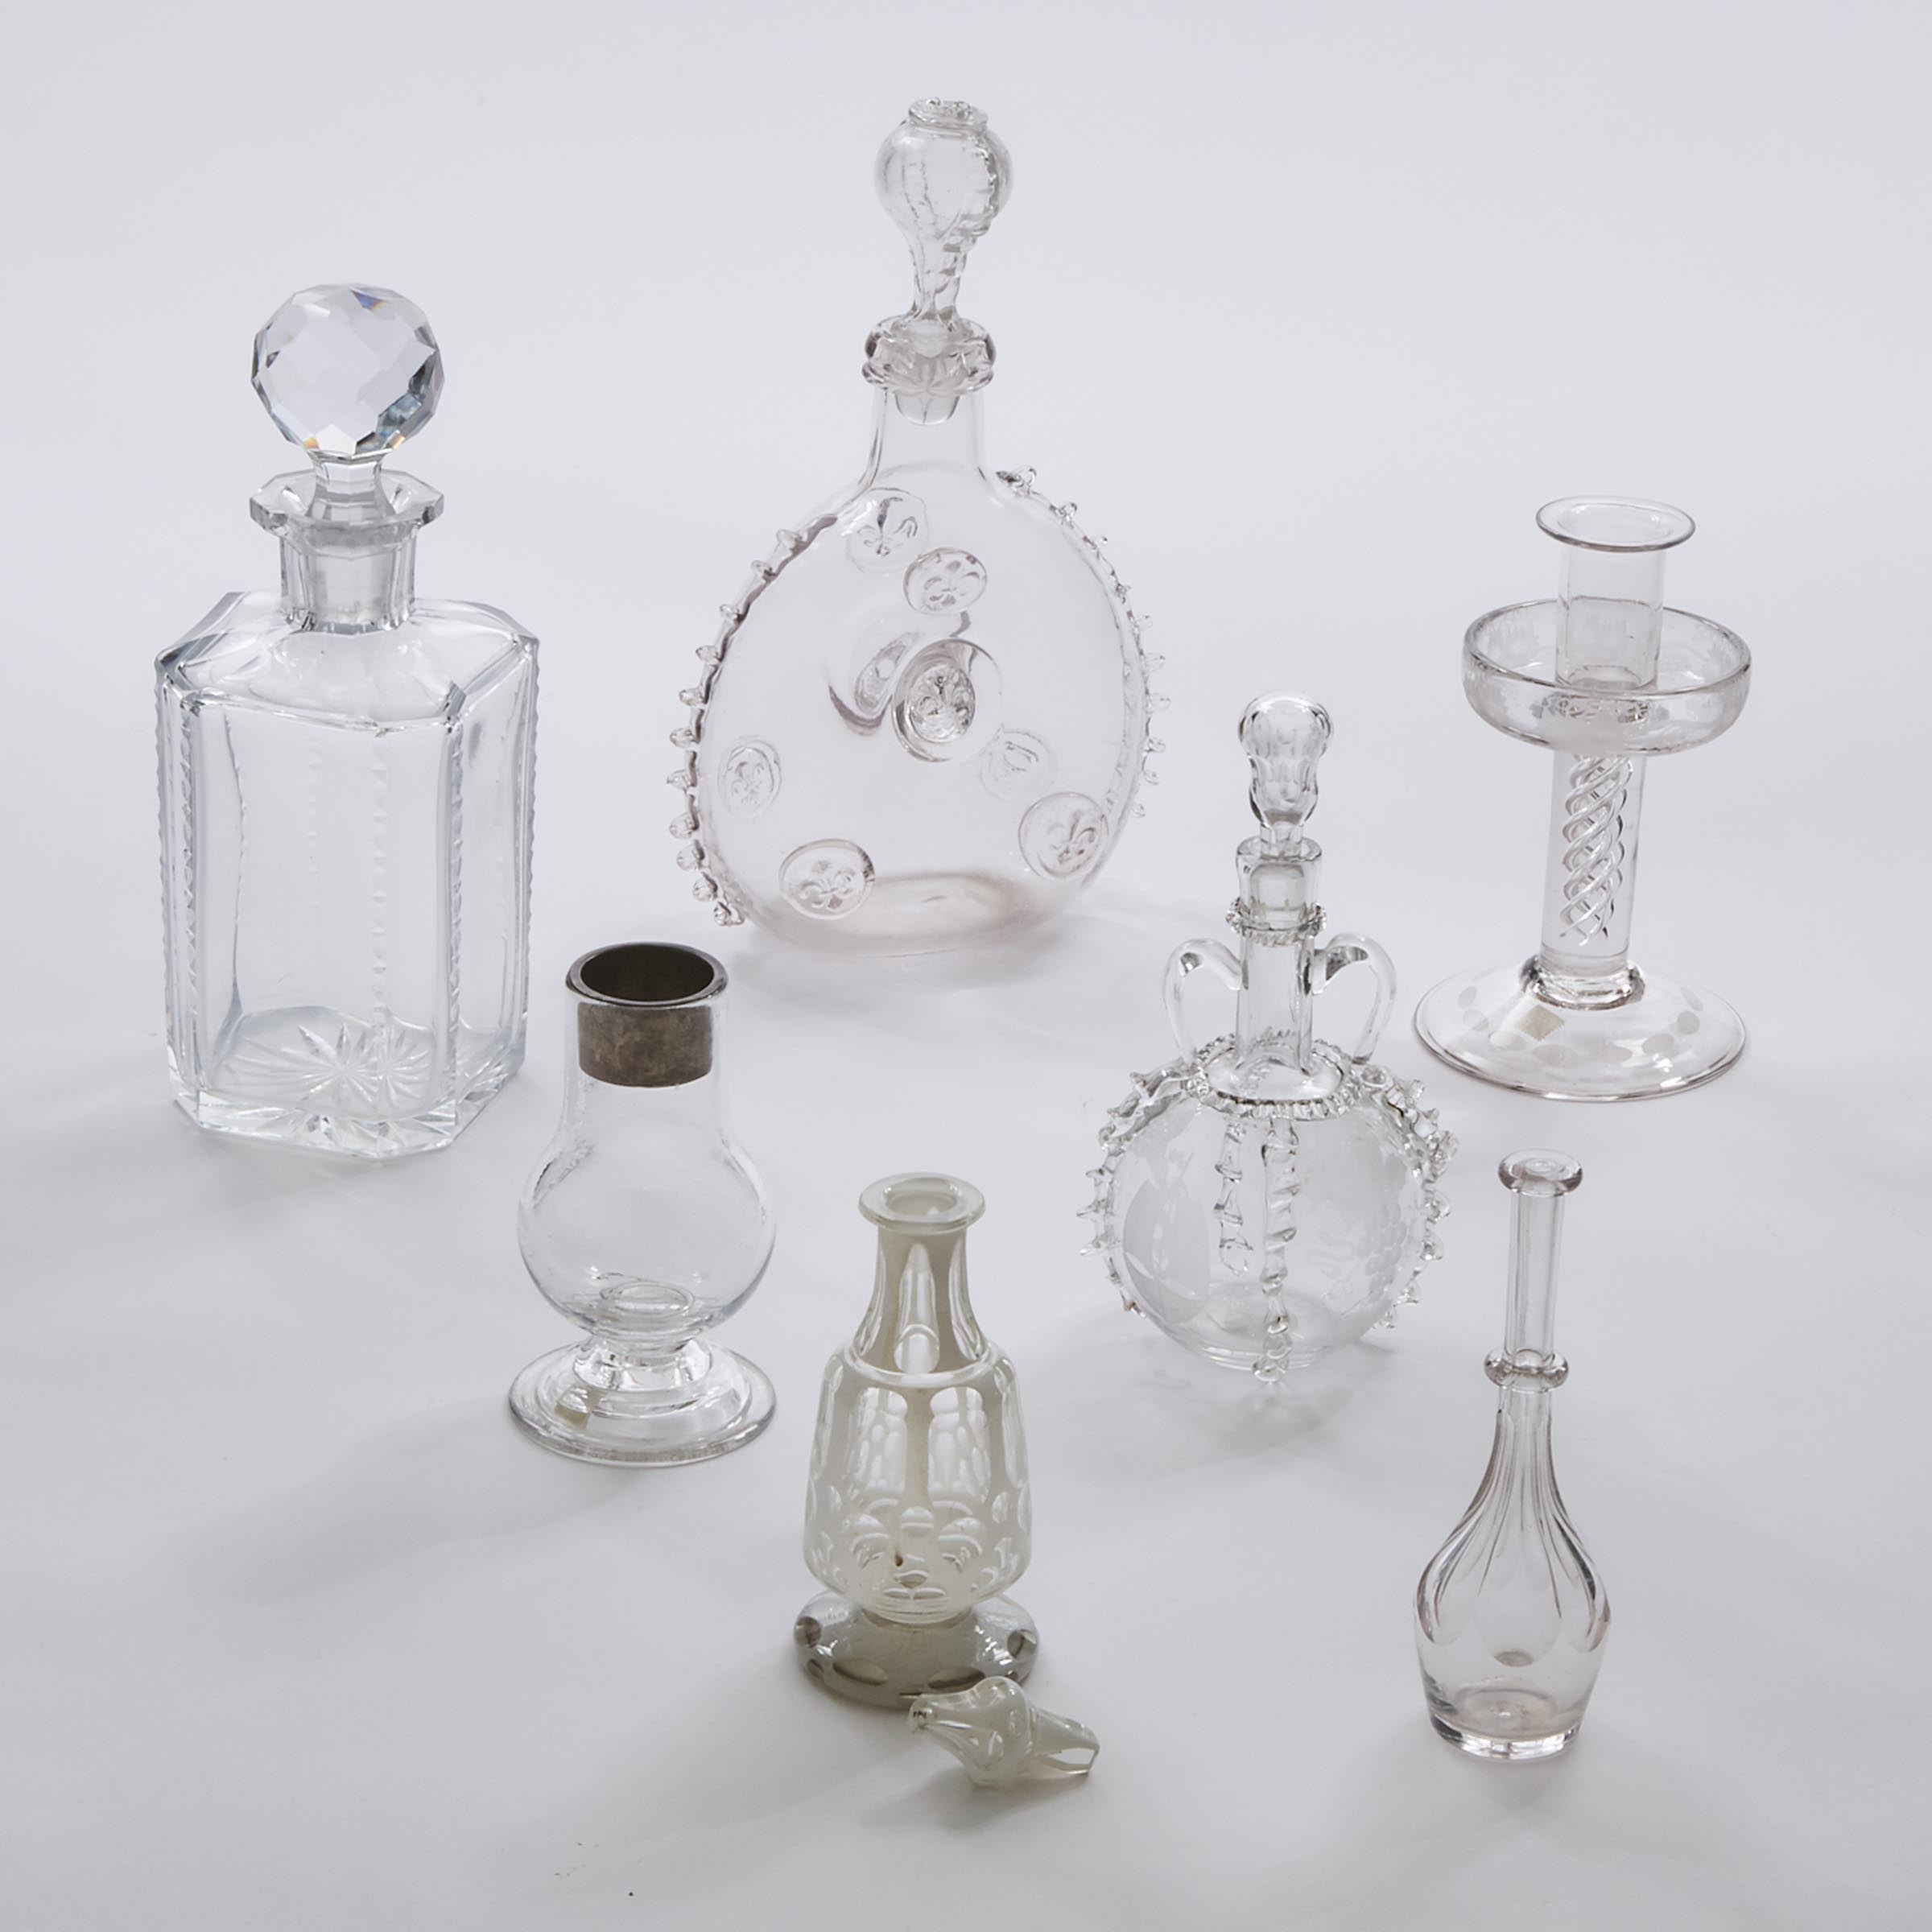 Group of English and Continental Glass, 18th/19th century